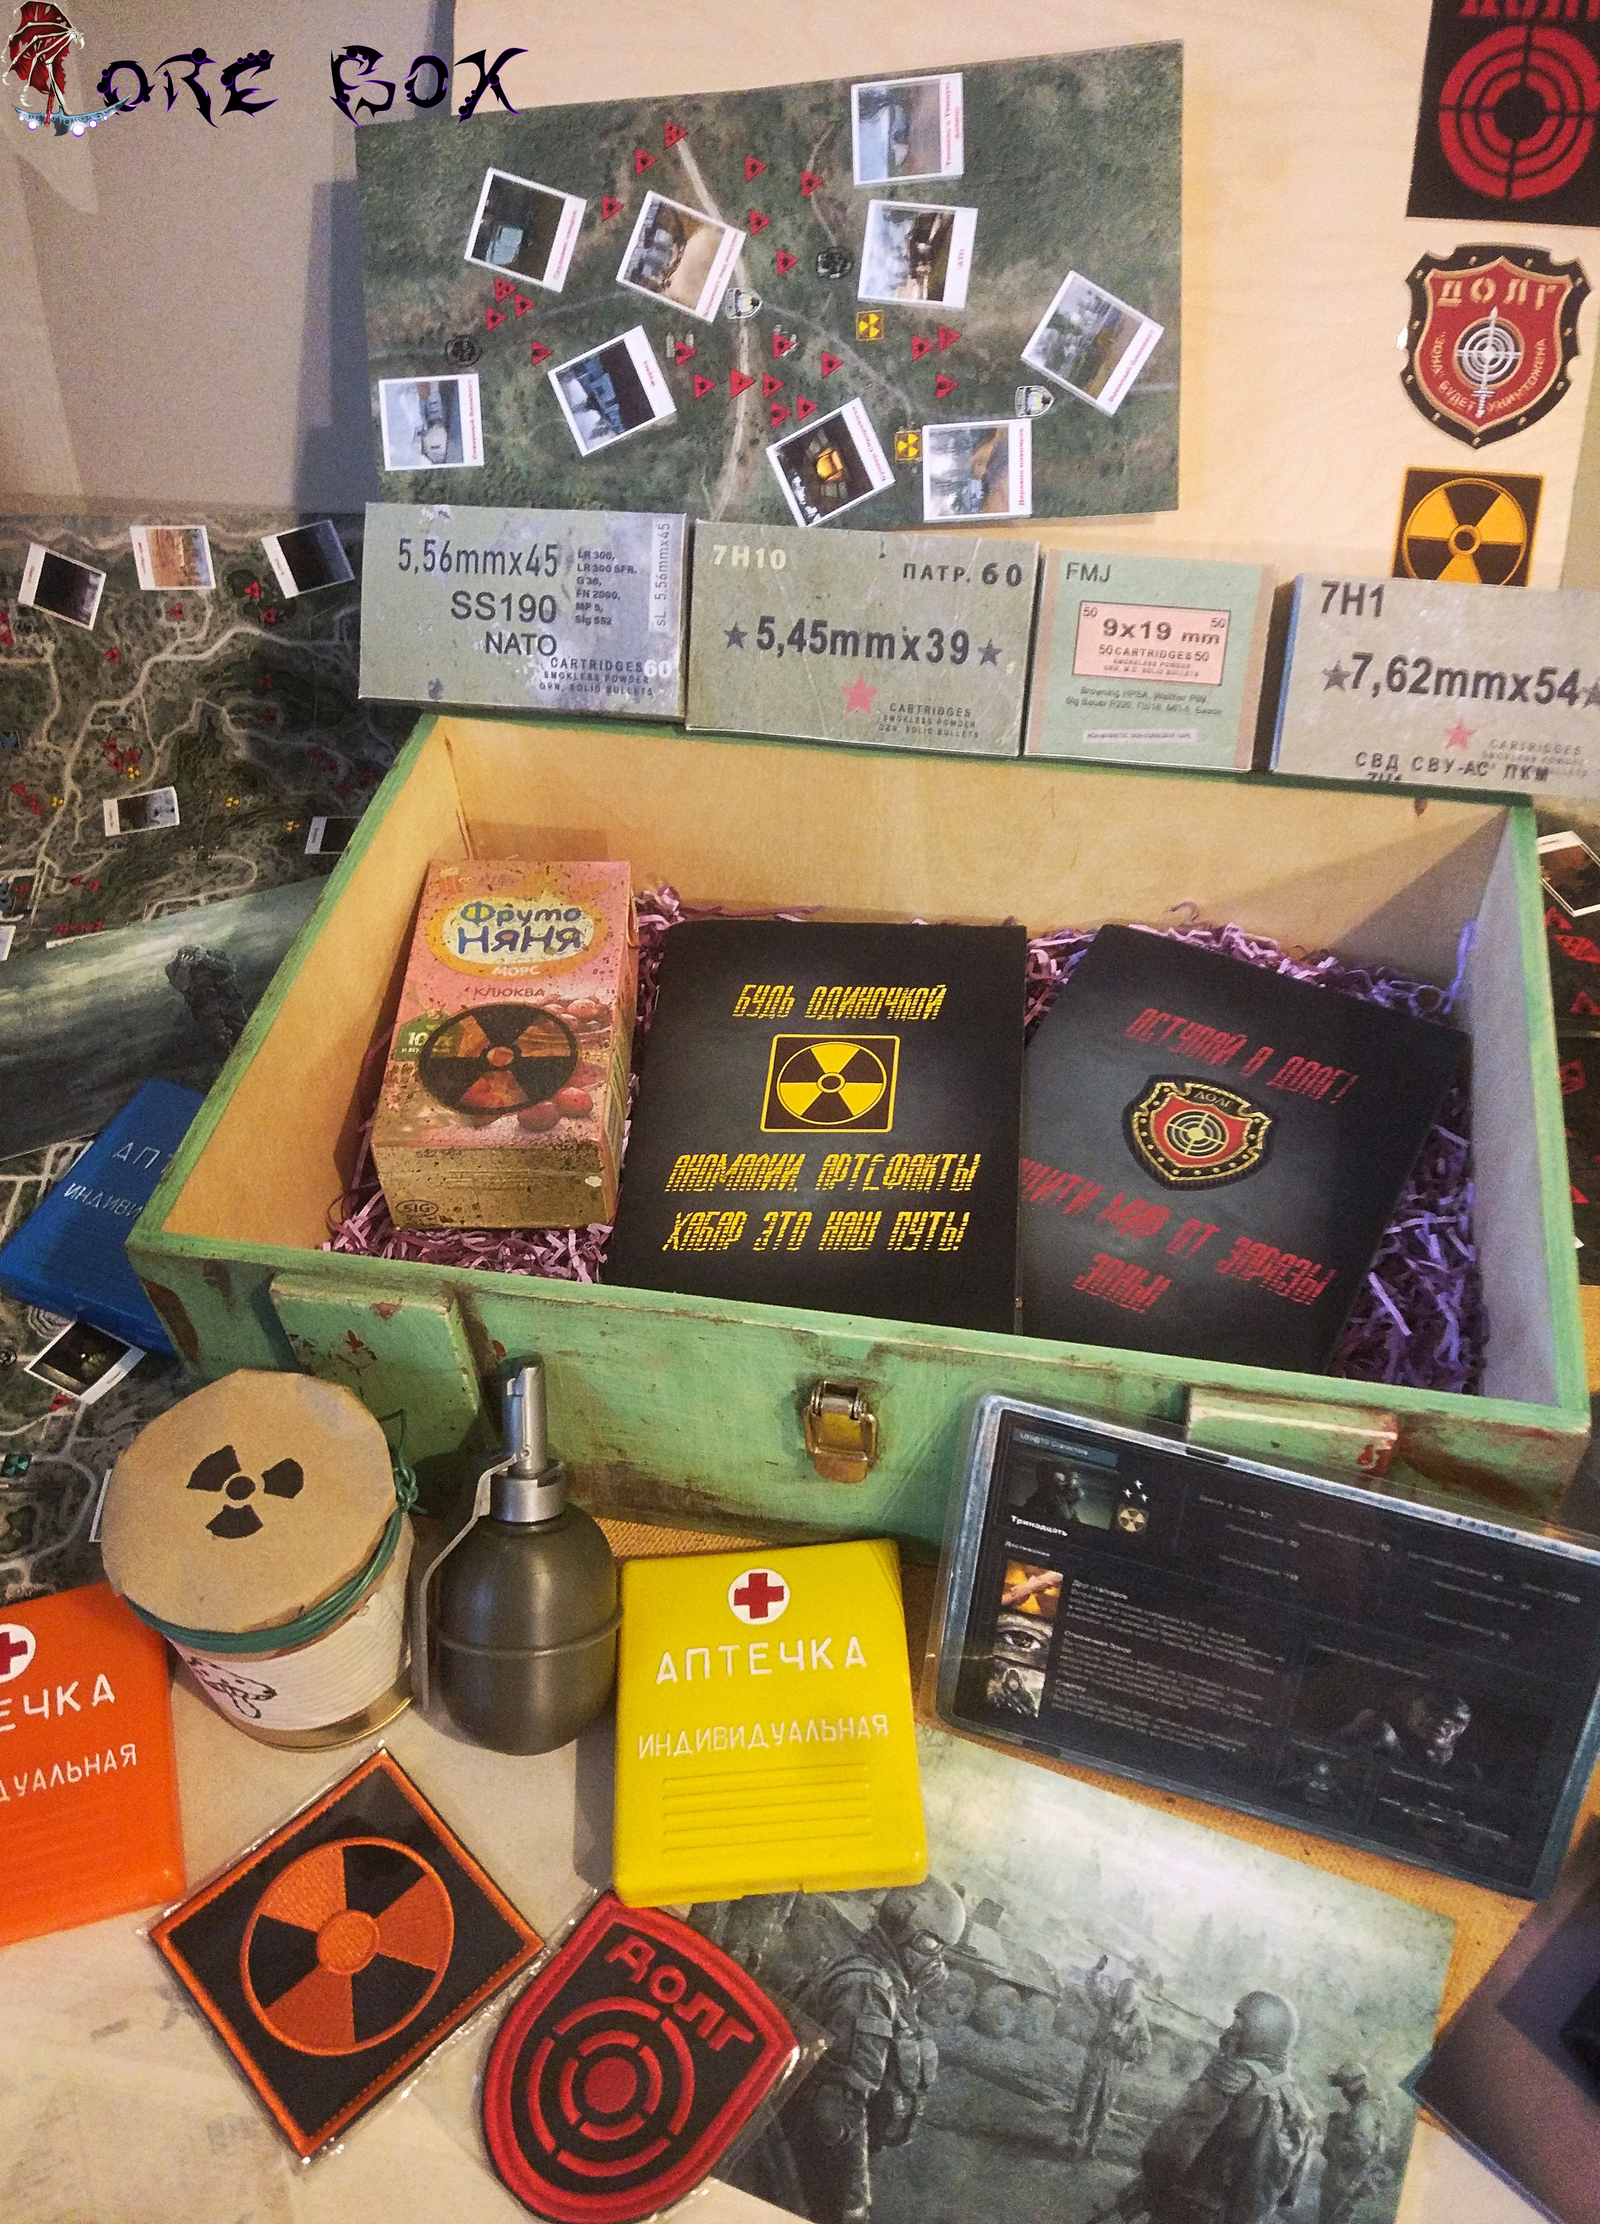 Fruits of the Last Months - My, Lorebox, Stalker, Fallout, Fallout: New Vegas, HOMM III, Stalker call of pripyat, With your own hands, Presents, Longpost, S.T.A.L.K.E.R.: Call of Pripyat